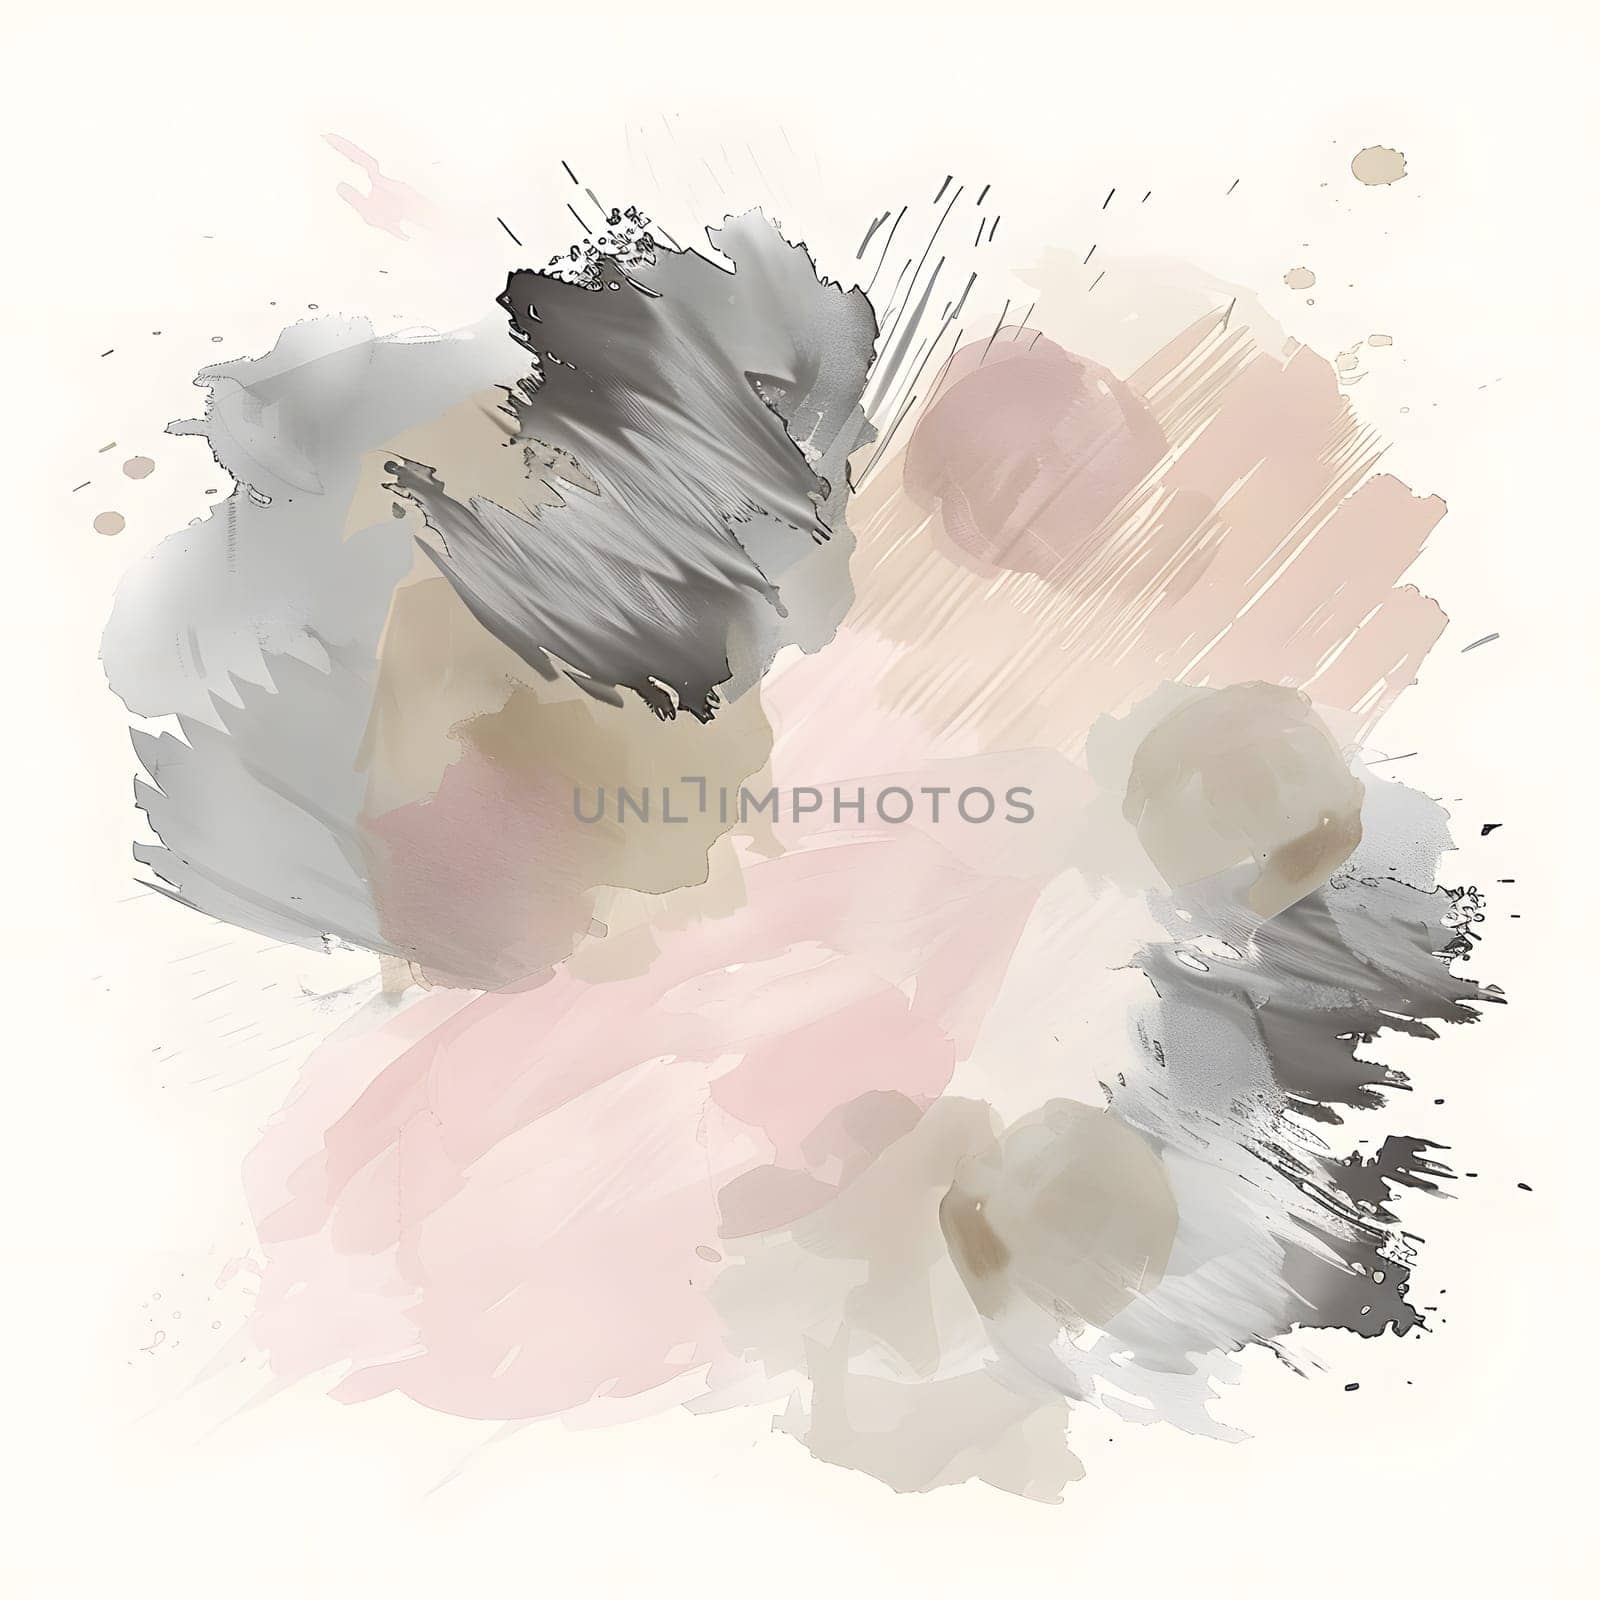 Artistic painting with delicate brush strokes resembling a watercolor effect by Nadtochiy